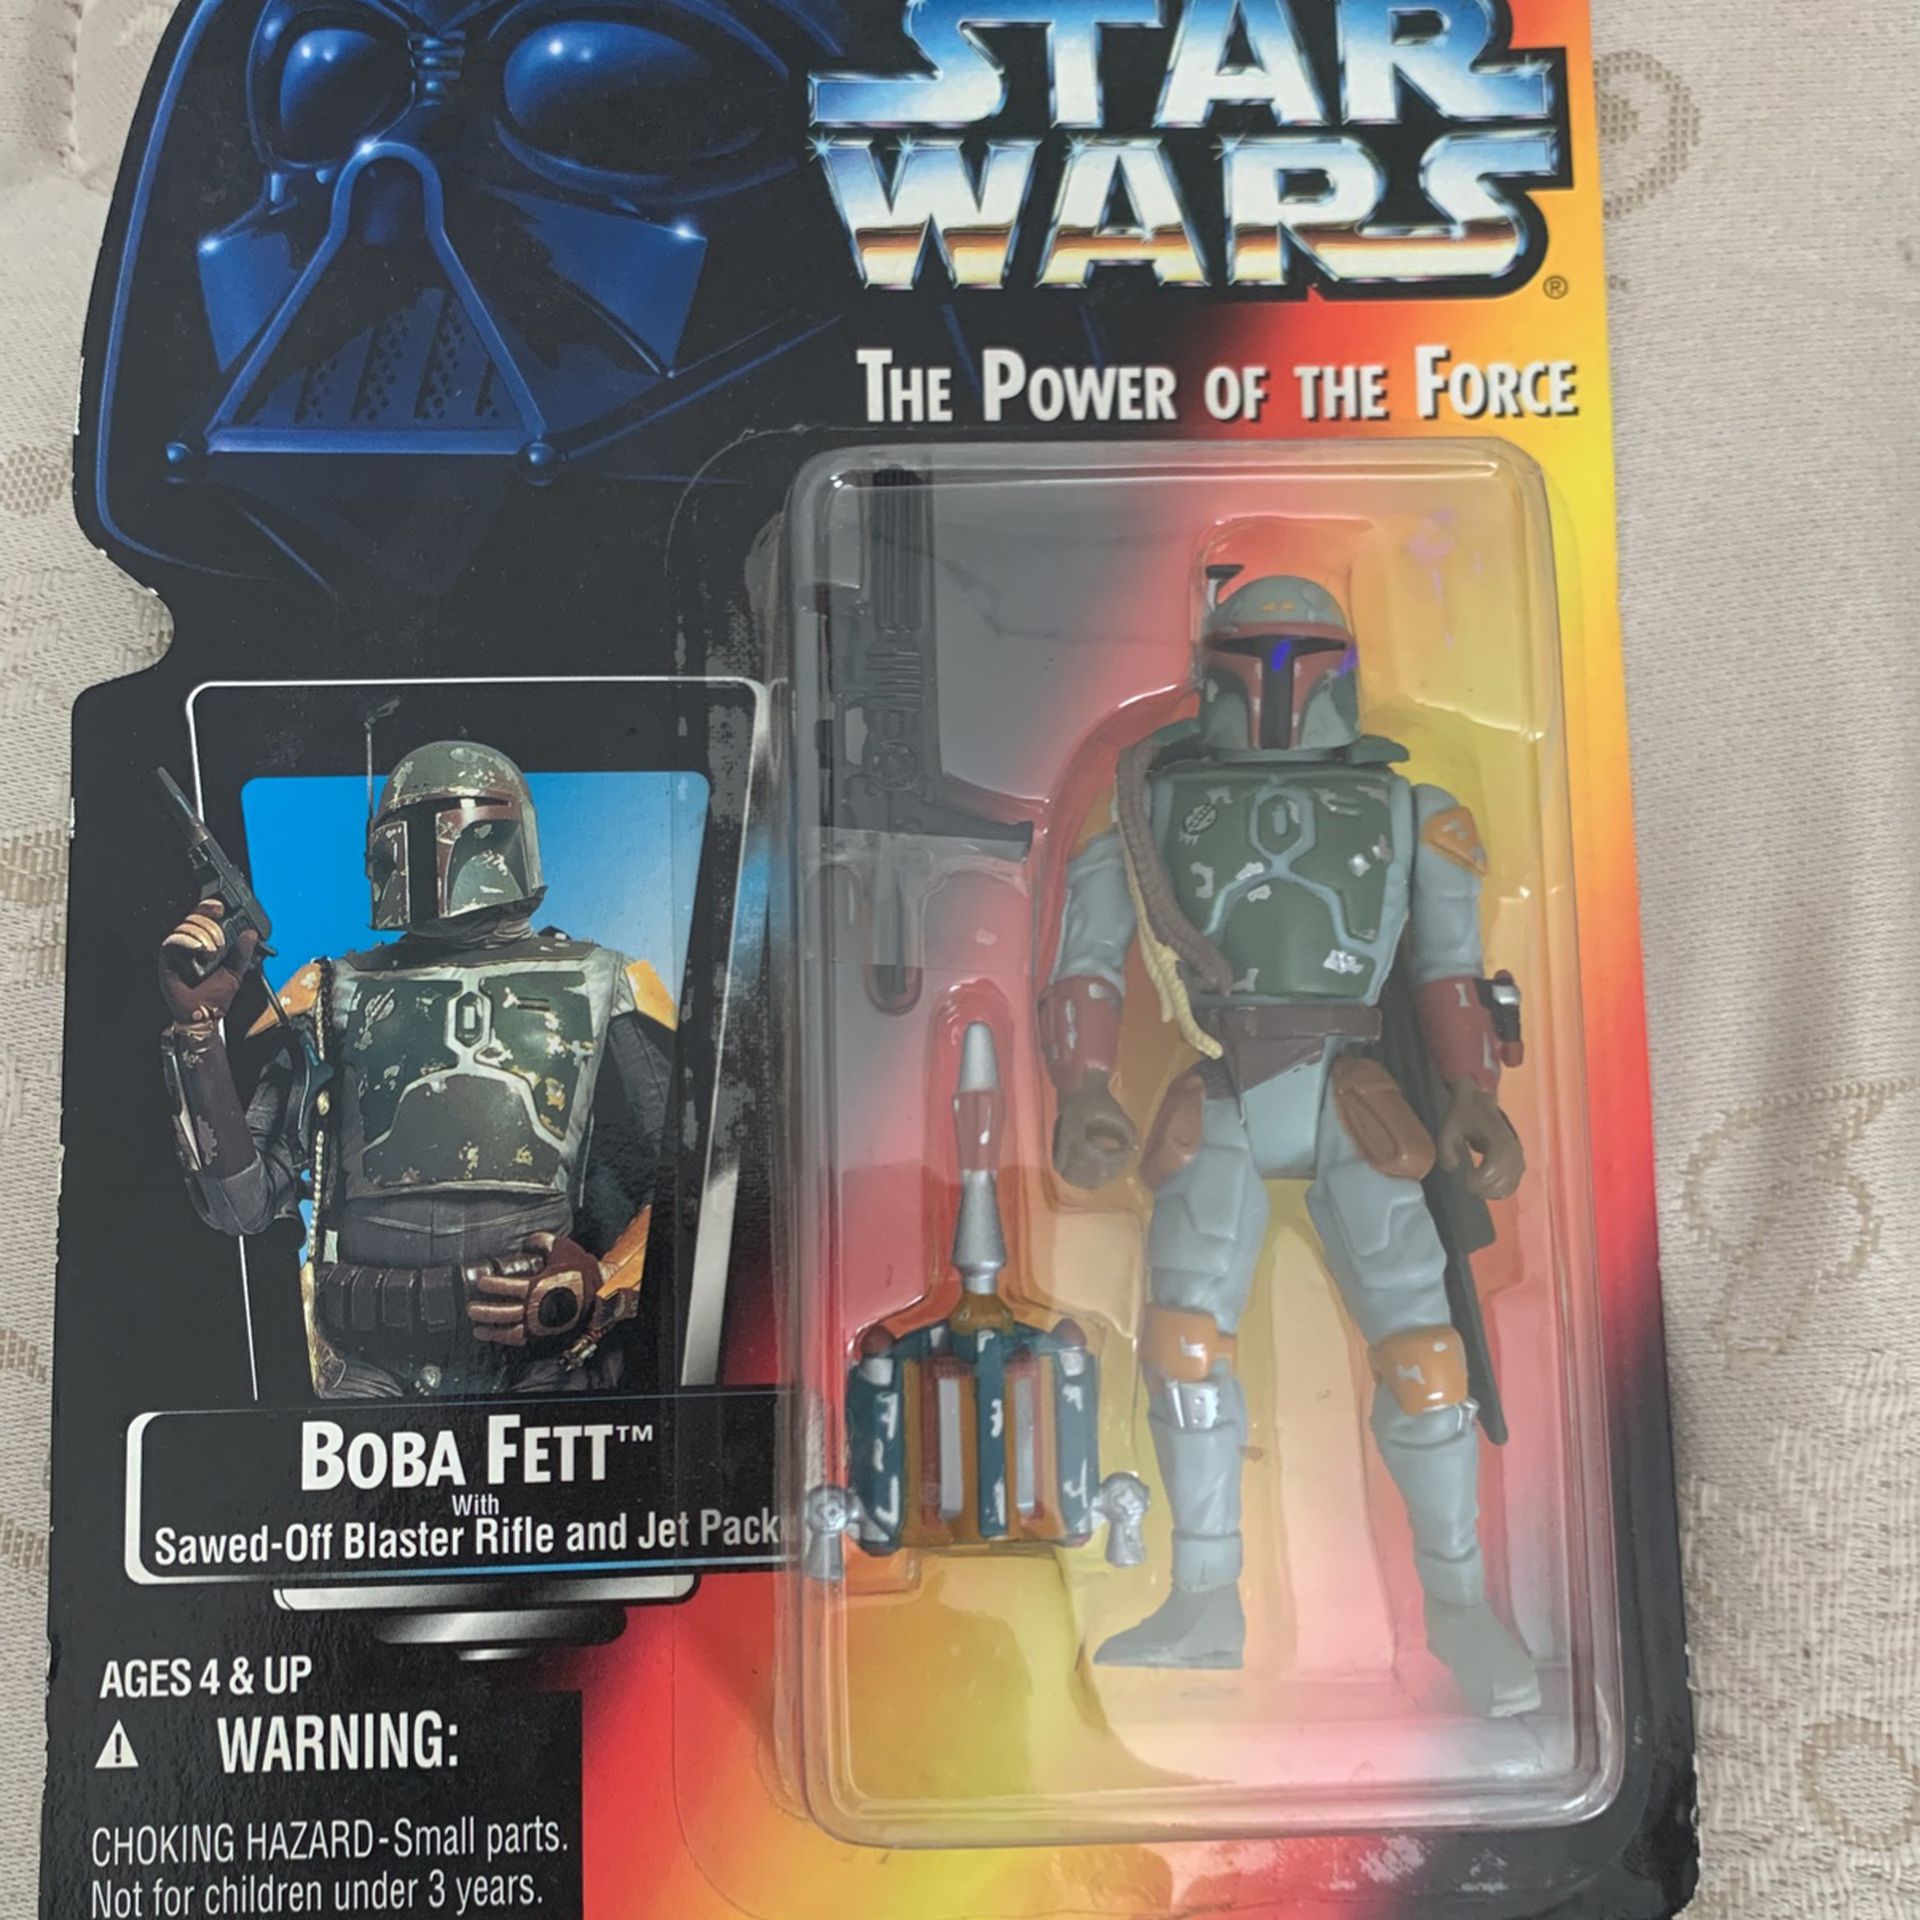 1995 Star Wars the power of the force Boba Fett